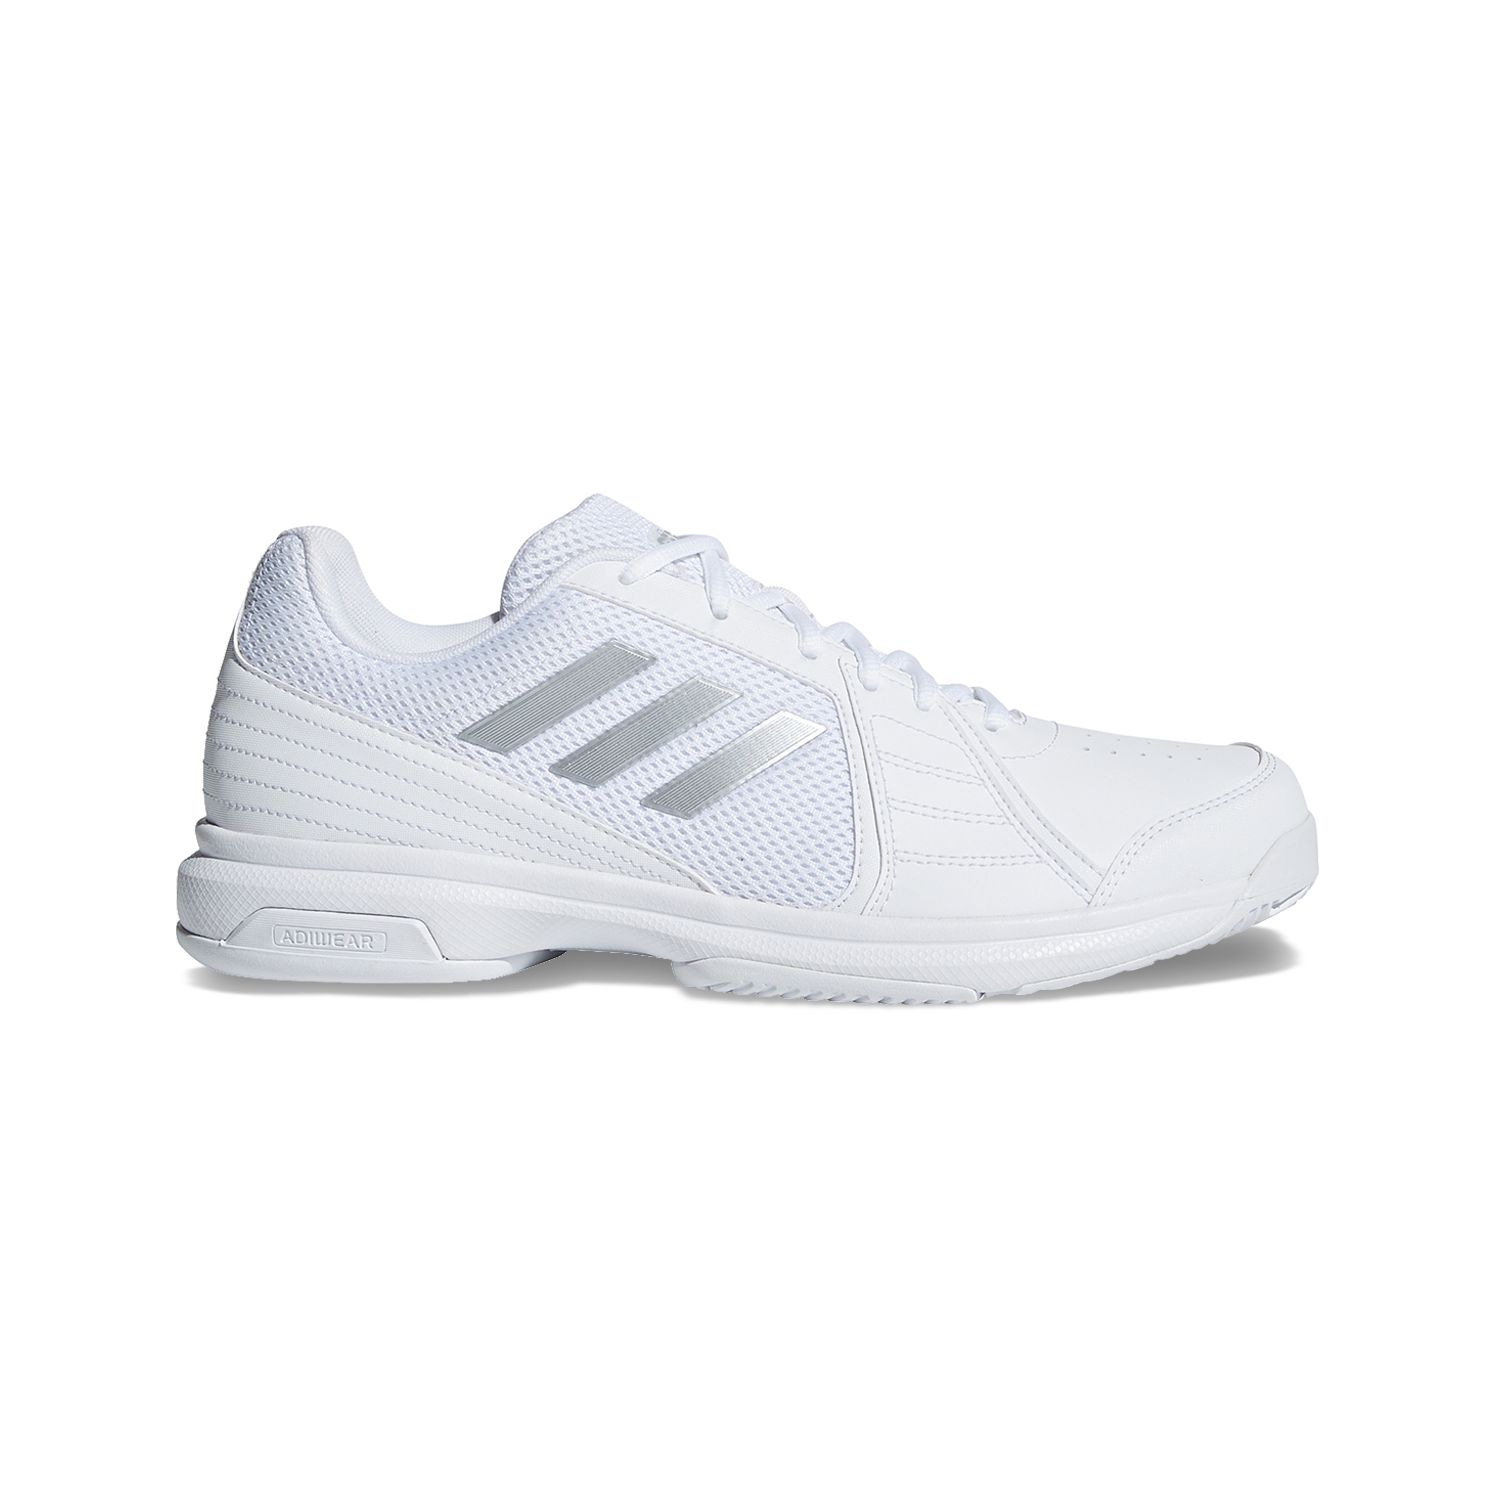 adidas approach shoes tennis